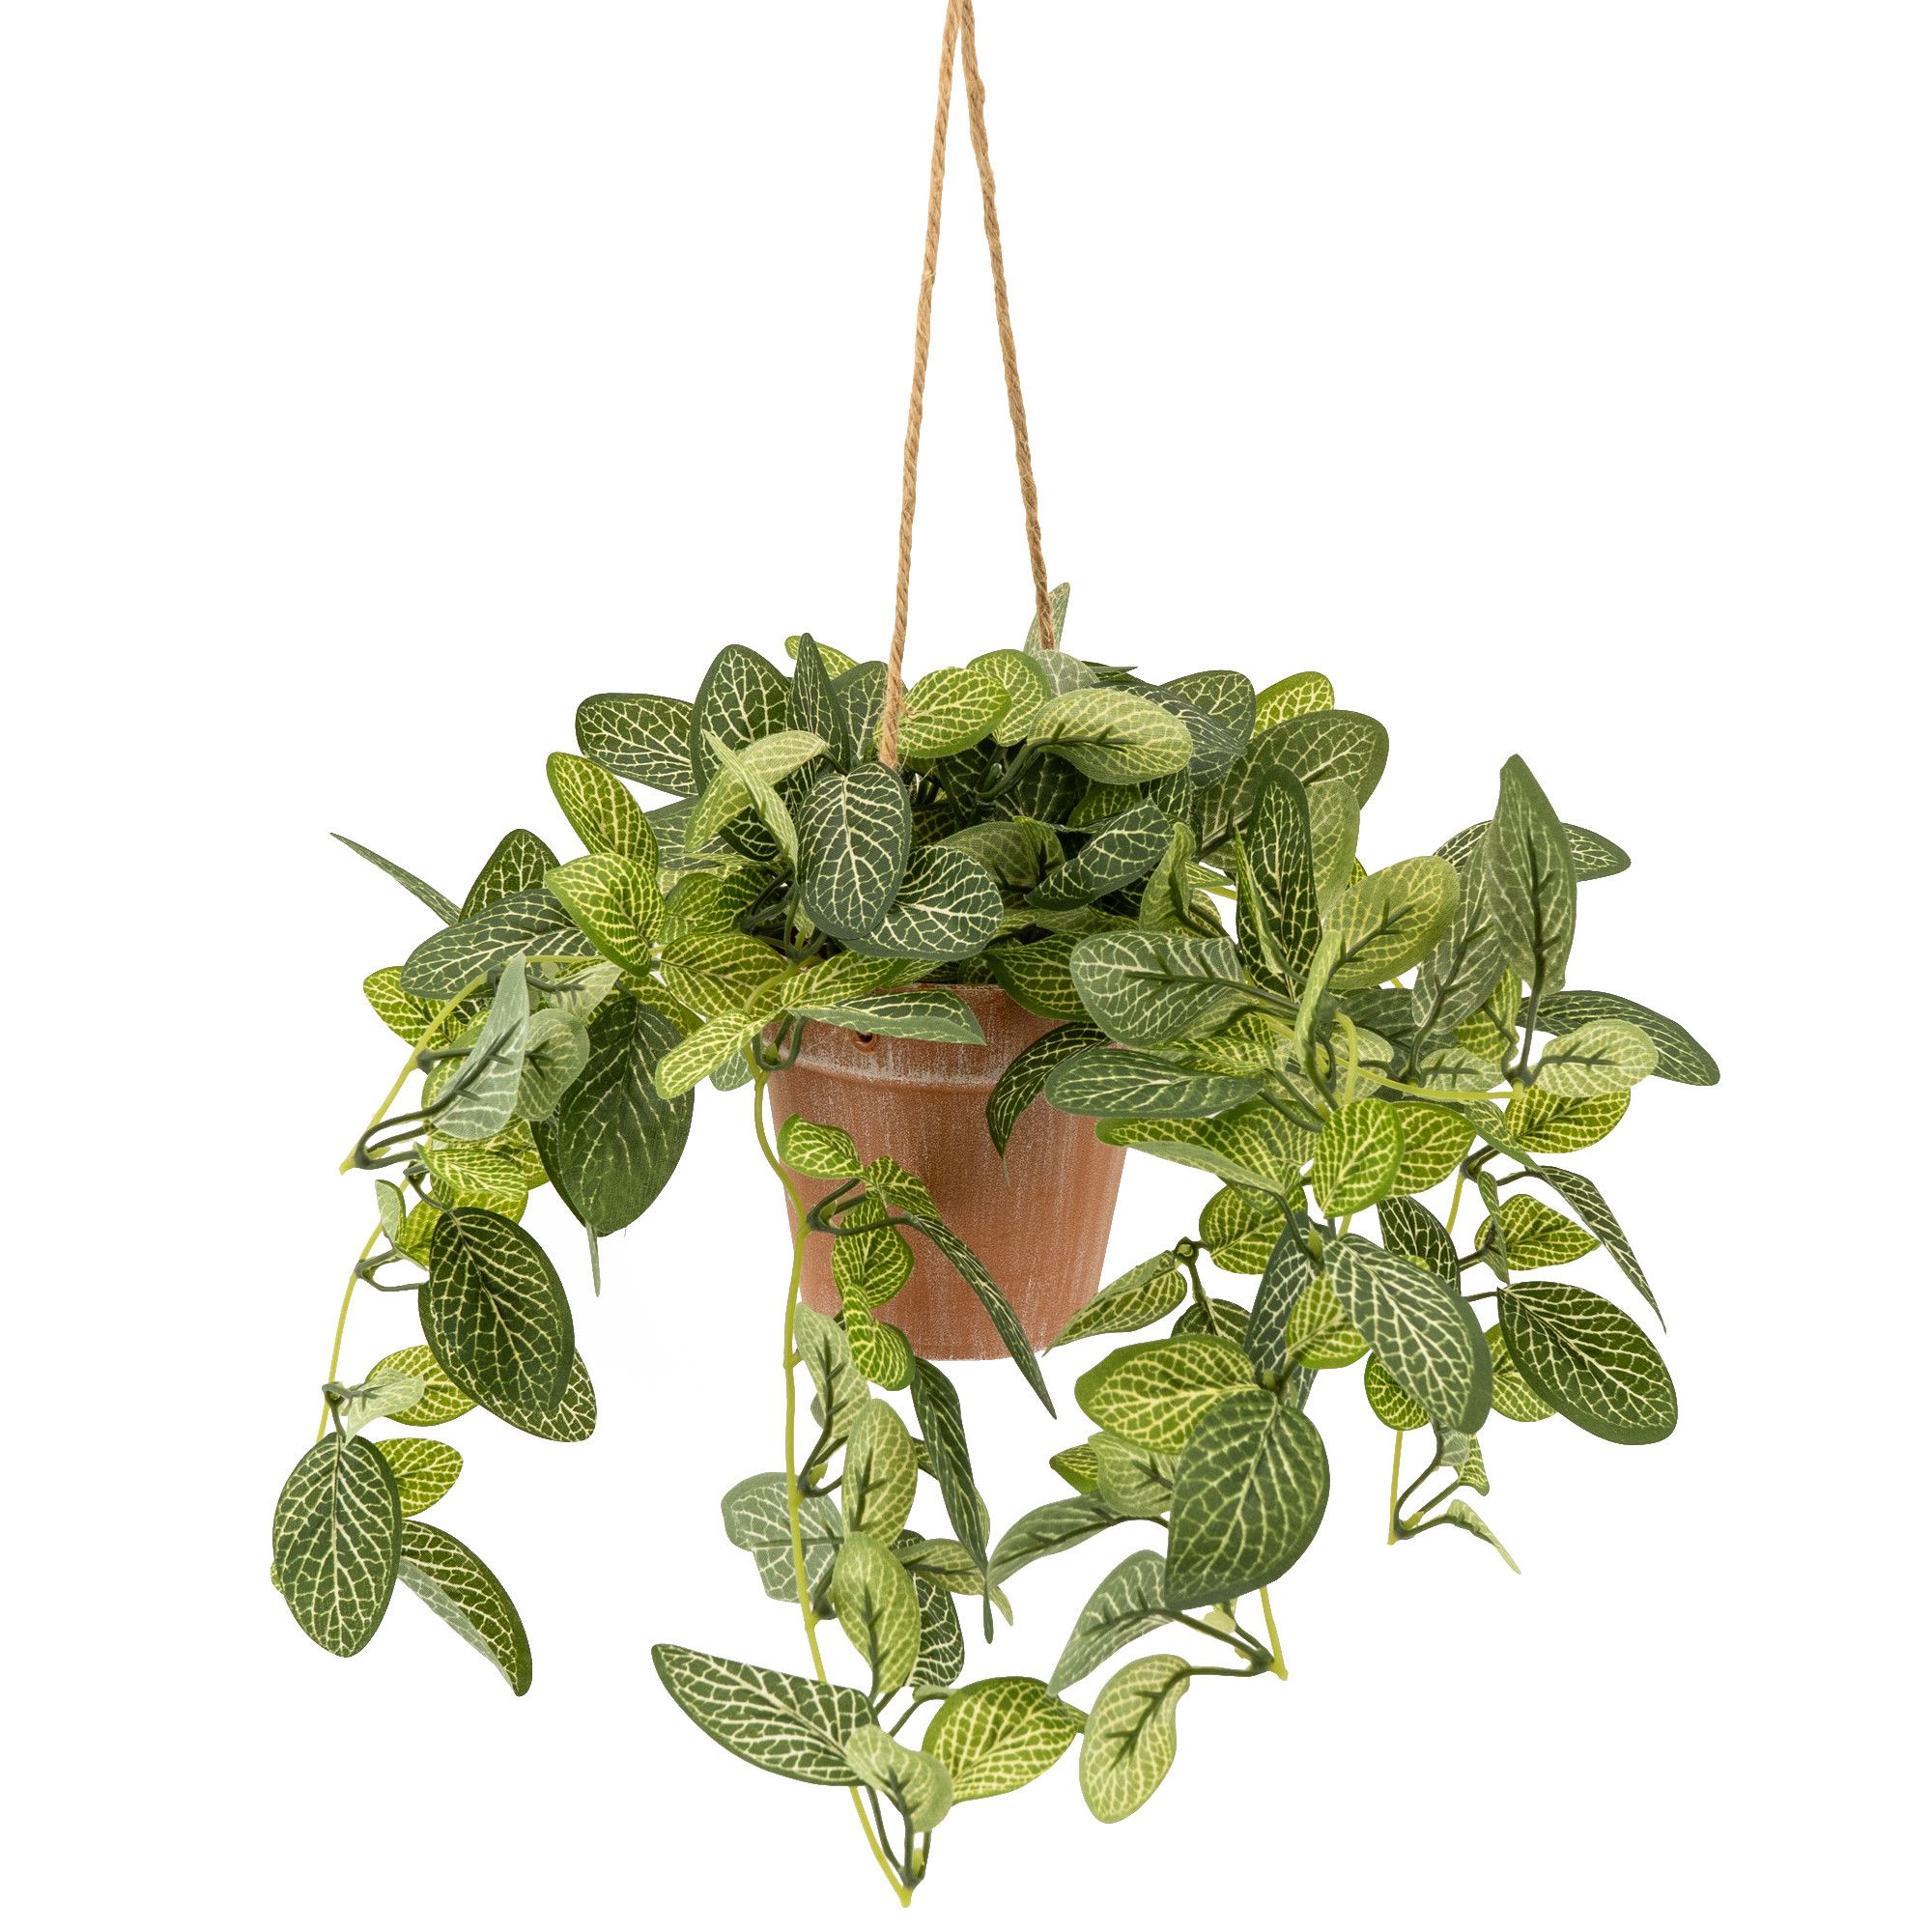 17cm Plant Pot with artificial plant in Terracotta Hanging trailing Melamine Pot